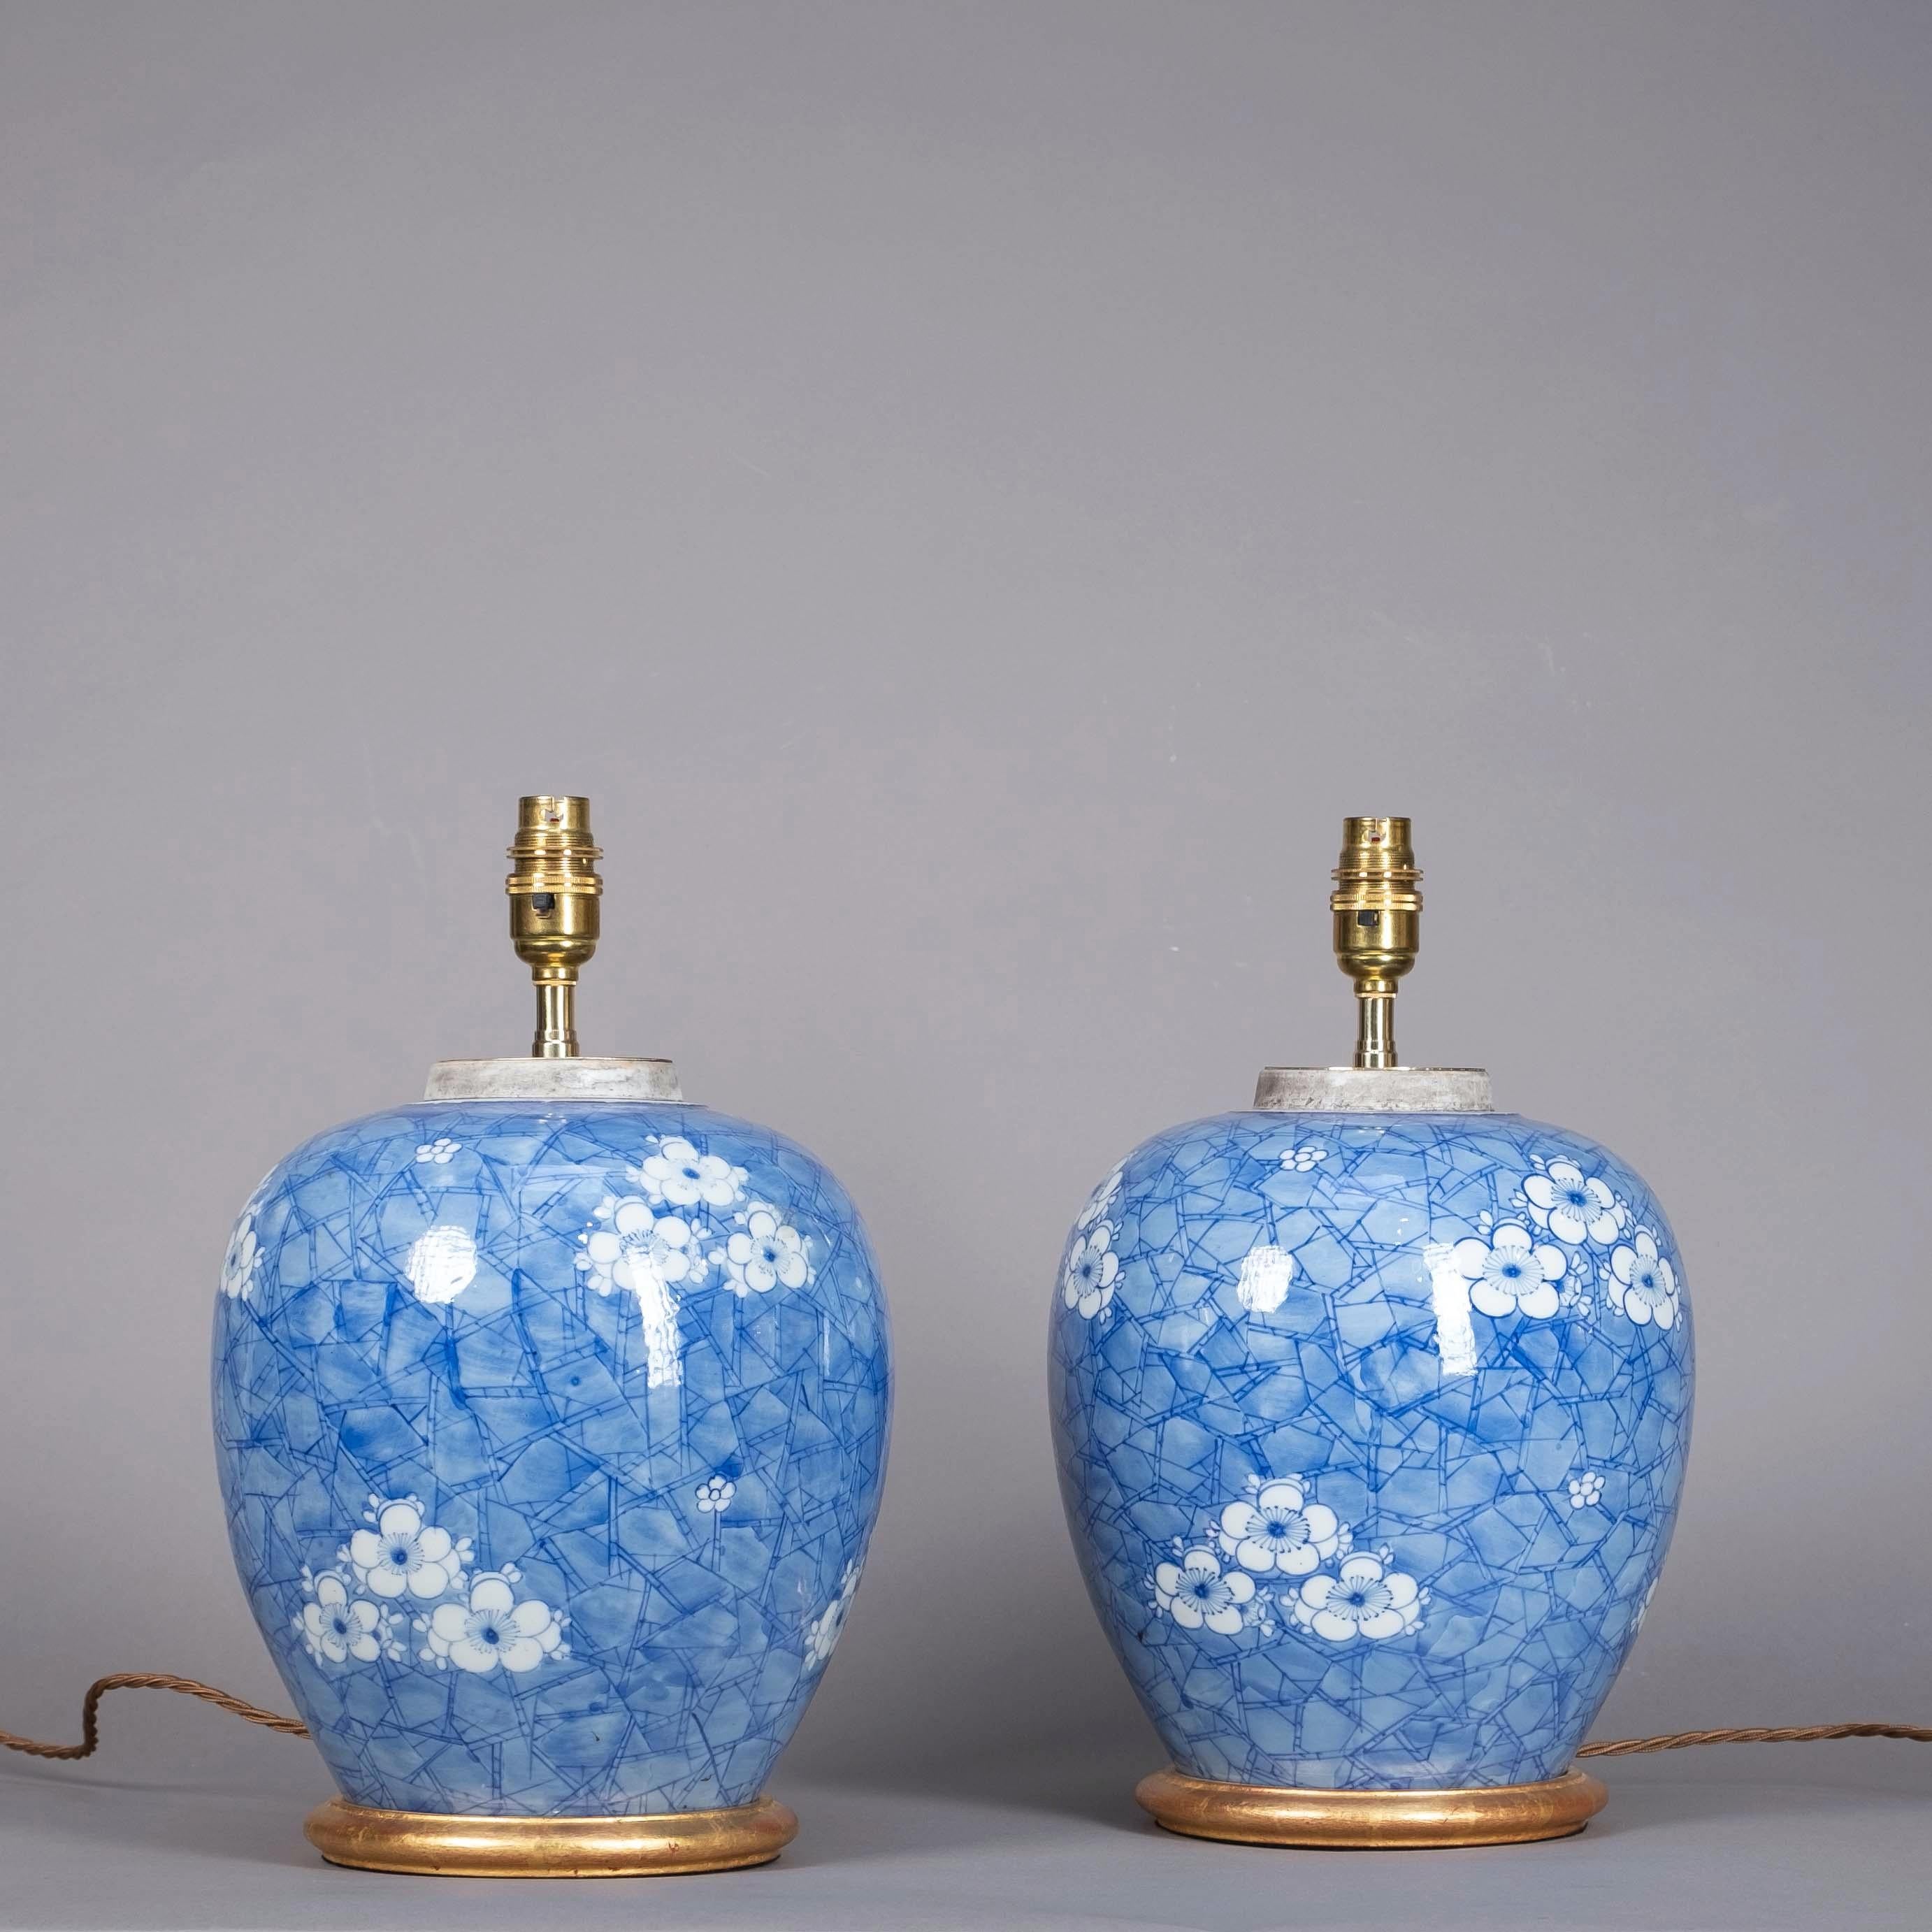 A pair of late 19th century blue and white porcelain ginger jars, the bulbous bodies decorated with cherry blossoms upon a “cracked ice” ground.

Now mounted as lamps and set upon turned giltwood bases.

Dimensions listed refer to height up to